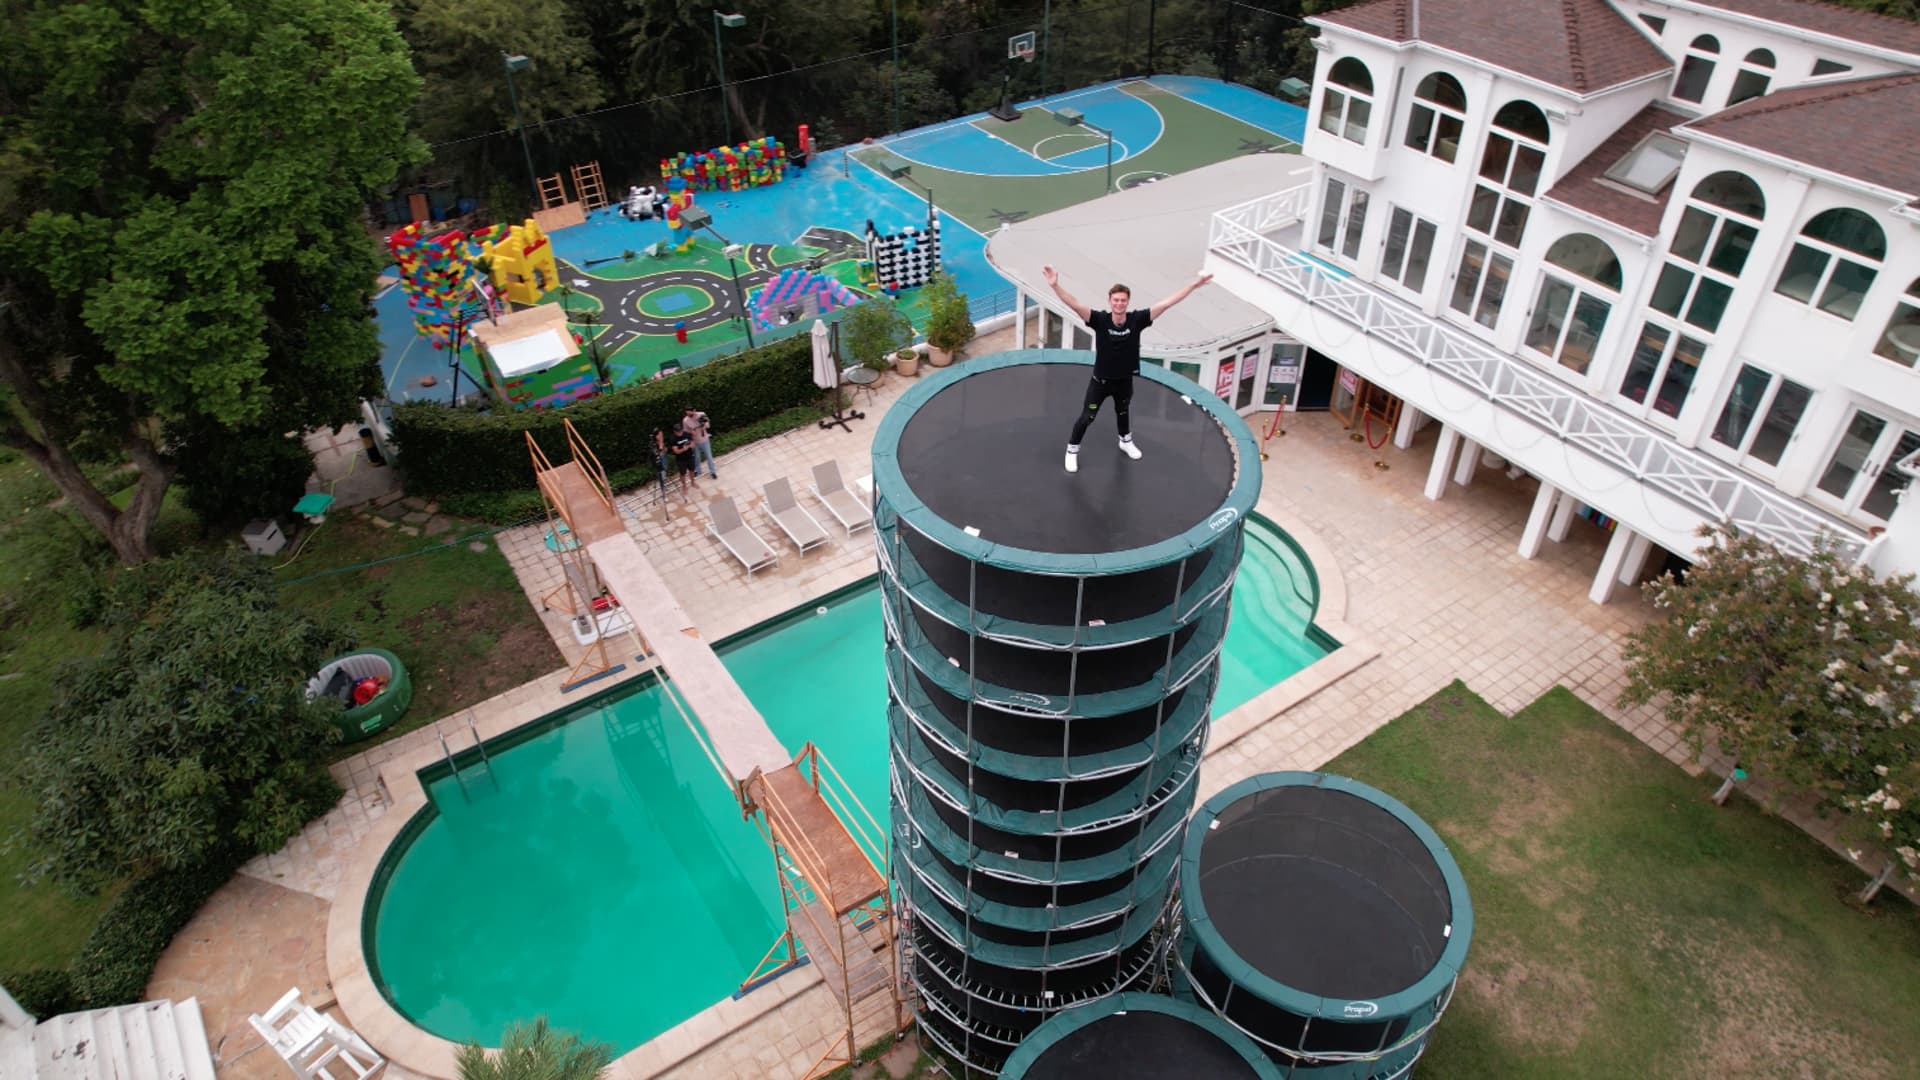 Carter Sharer standing on a stack of trampolines outside the YouTube group Team RAR's rental home.